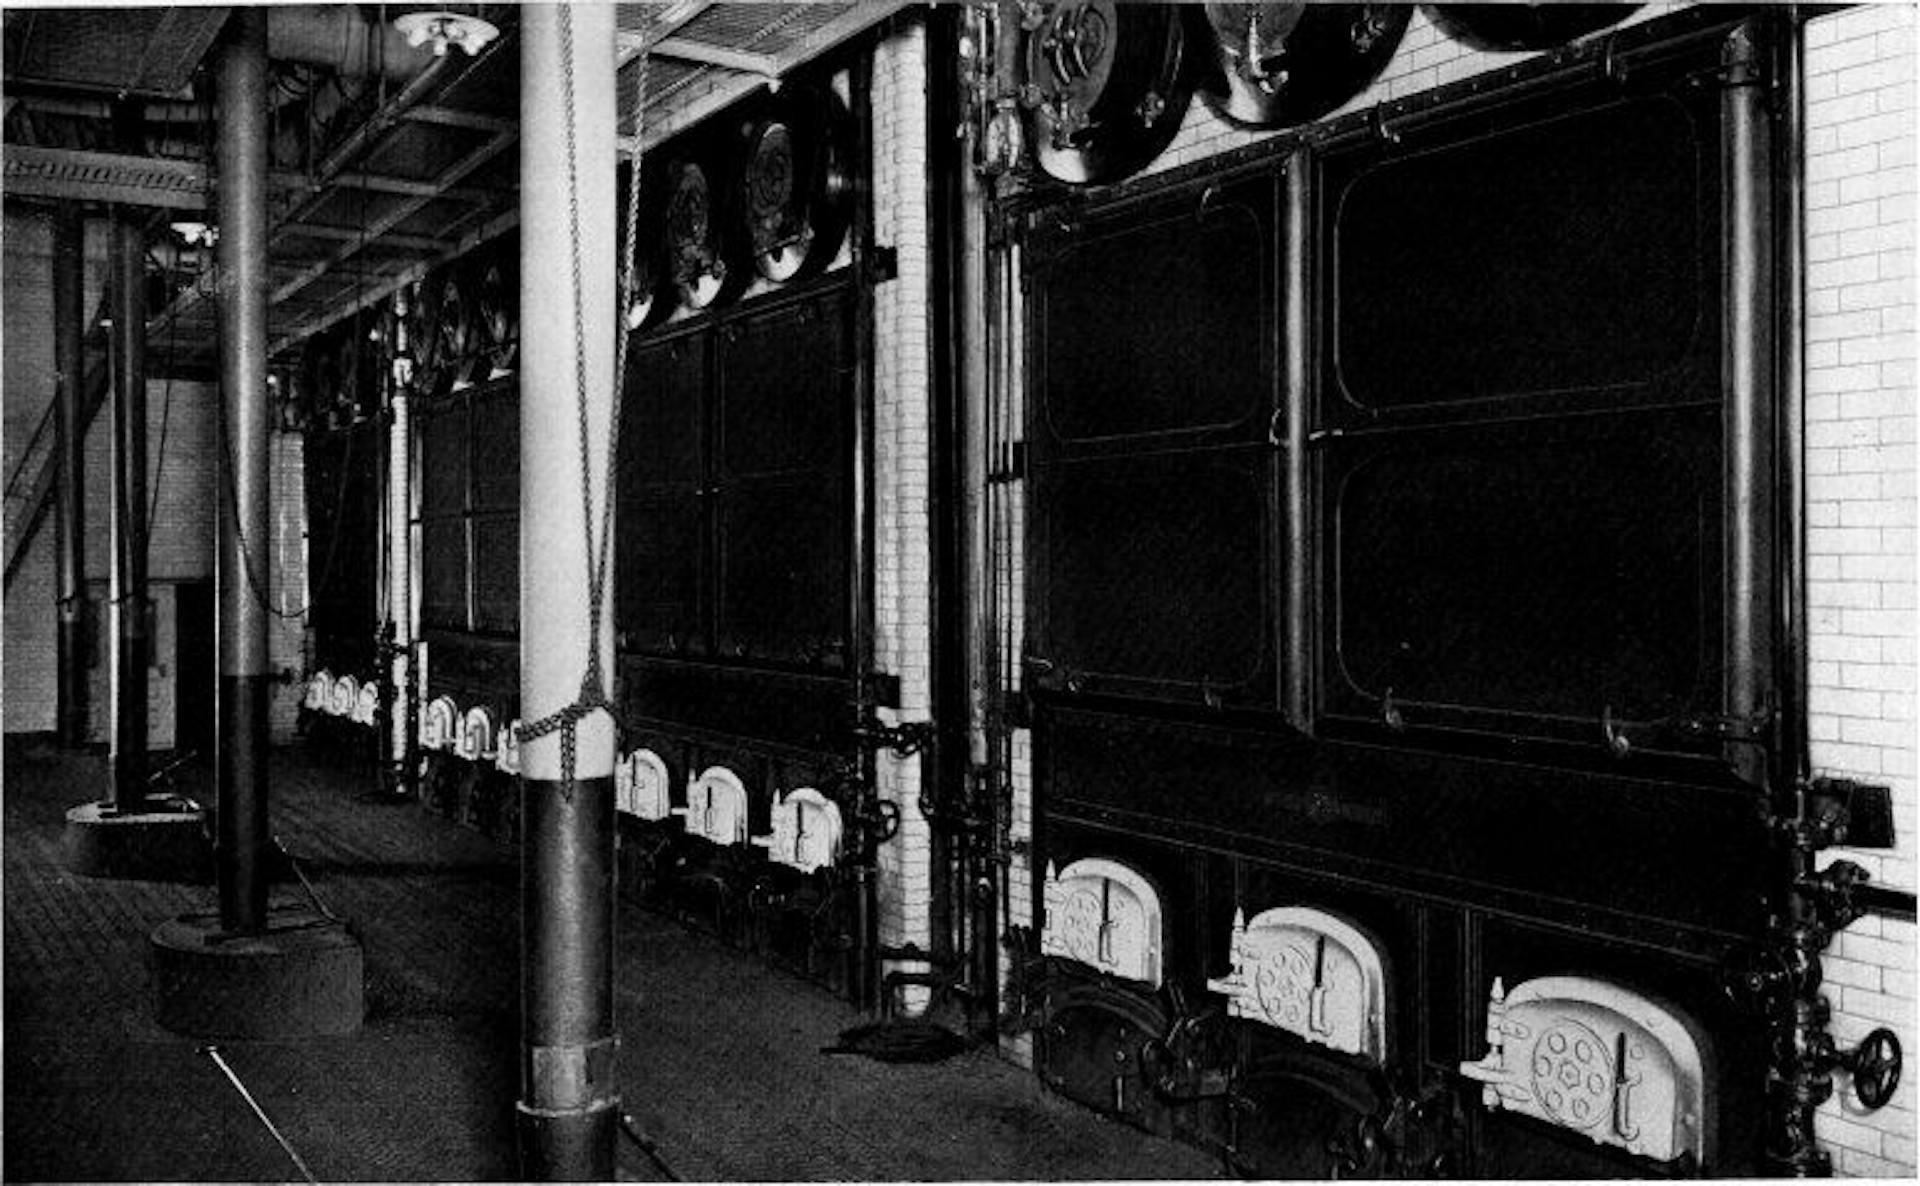 Portion of 4160 Horse-power Installation of Babcock & Wilcox Boilers at the Prudential Life Insurance Co. Building, Newark, N. J.